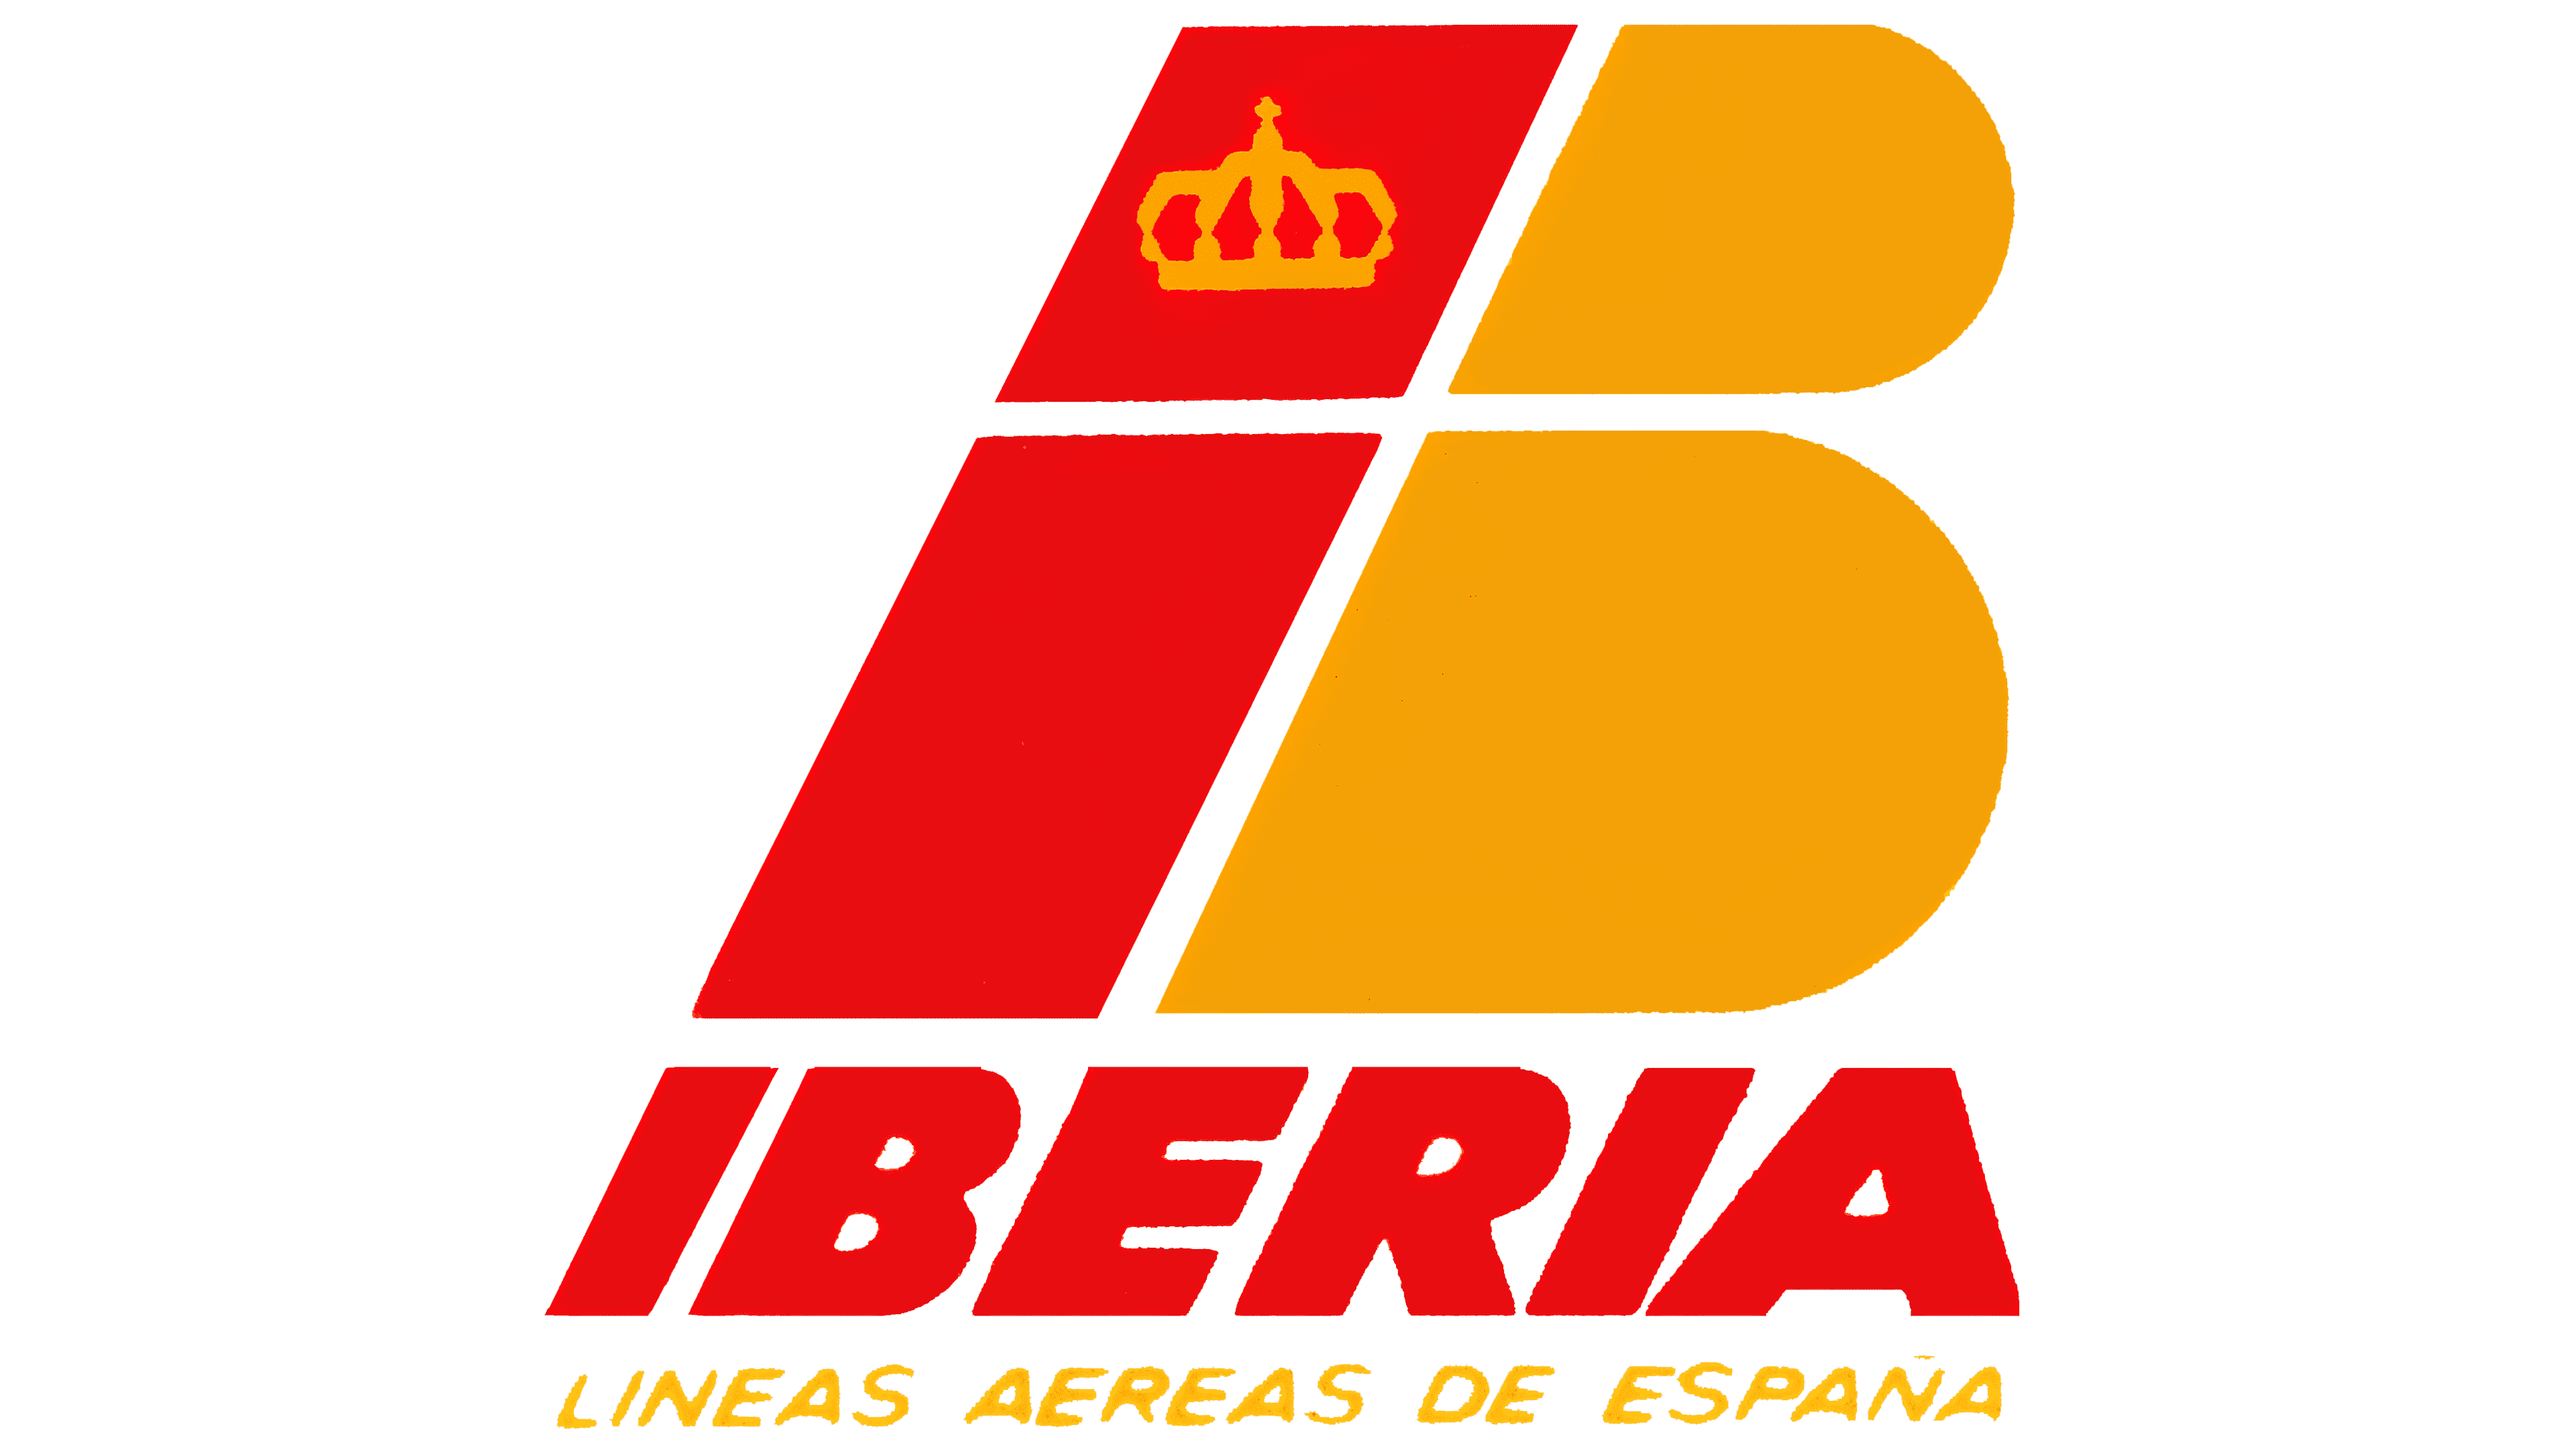 Iberia Logo The Most Famous Brands And Company Logos In The World